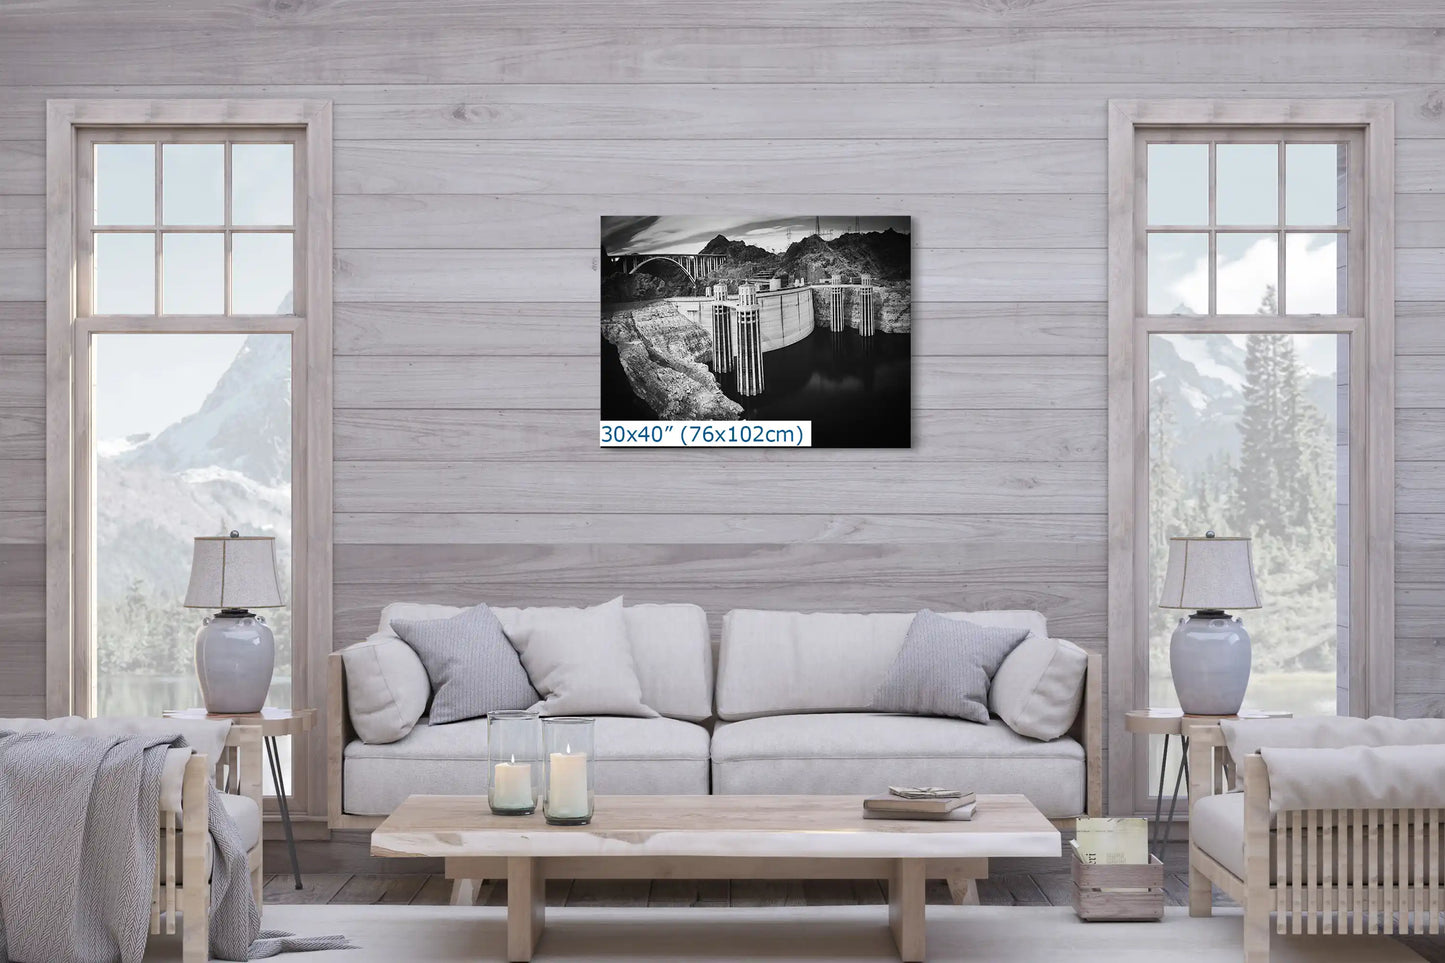 A large 30x40 canvas print of Hoover Dam in black and white, creating an impactful visual statement in a contemporary living room.